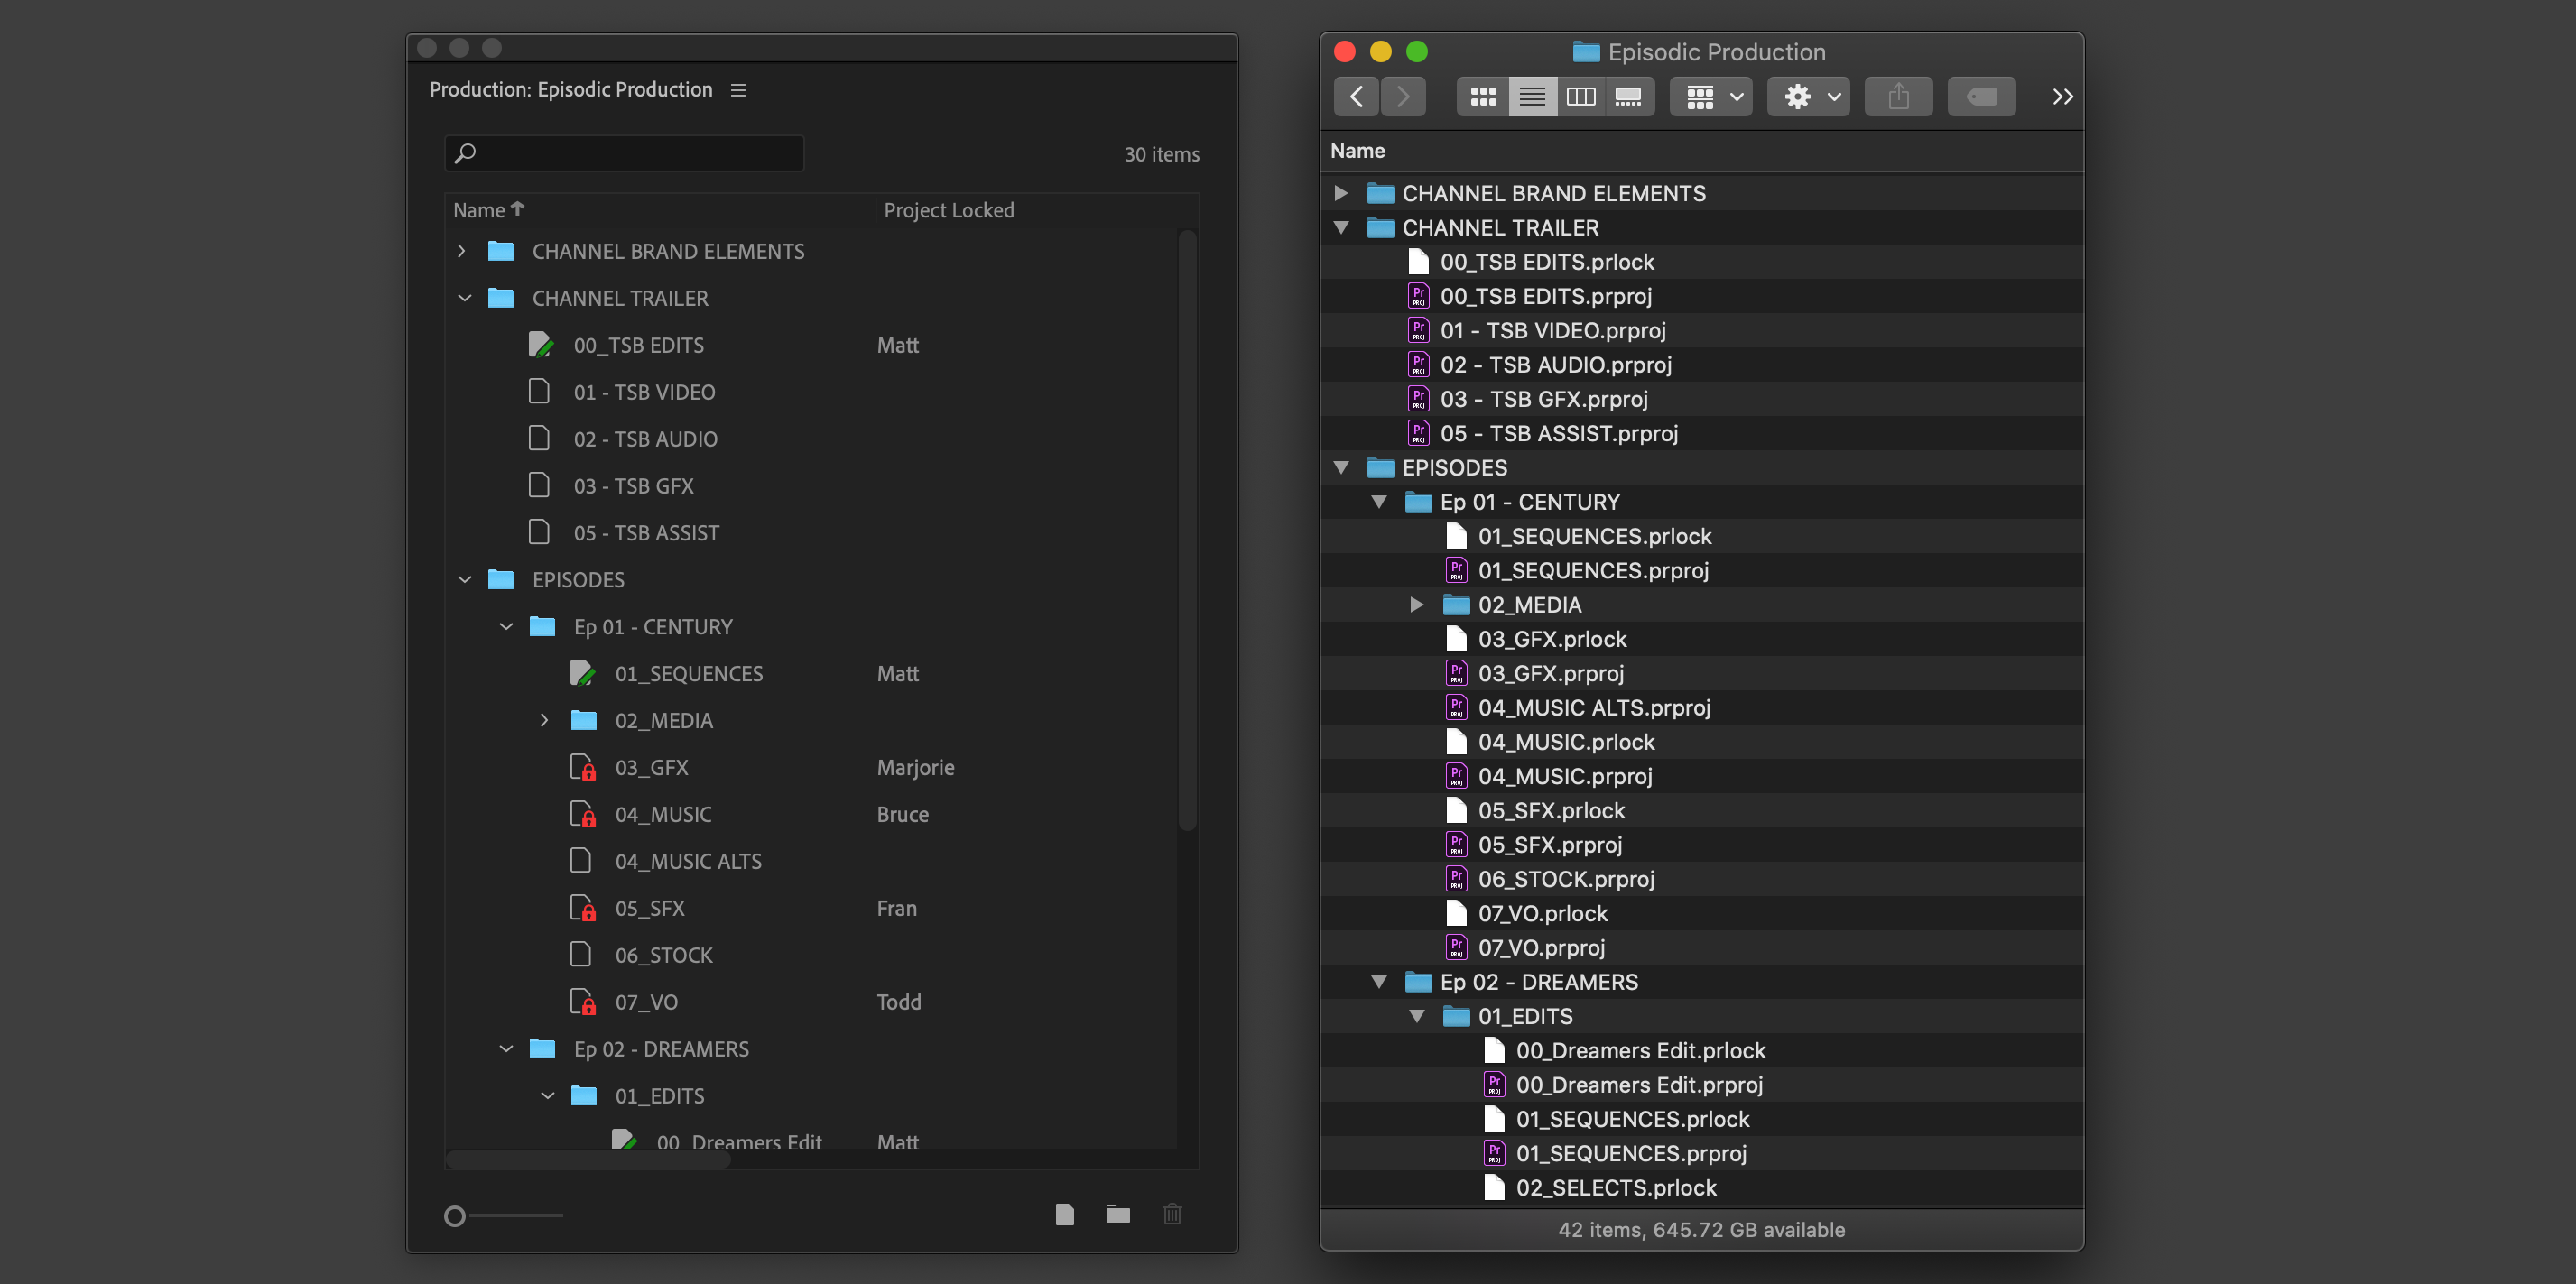 Productions: a new workflow coming to Adobe Premiere Pro 4